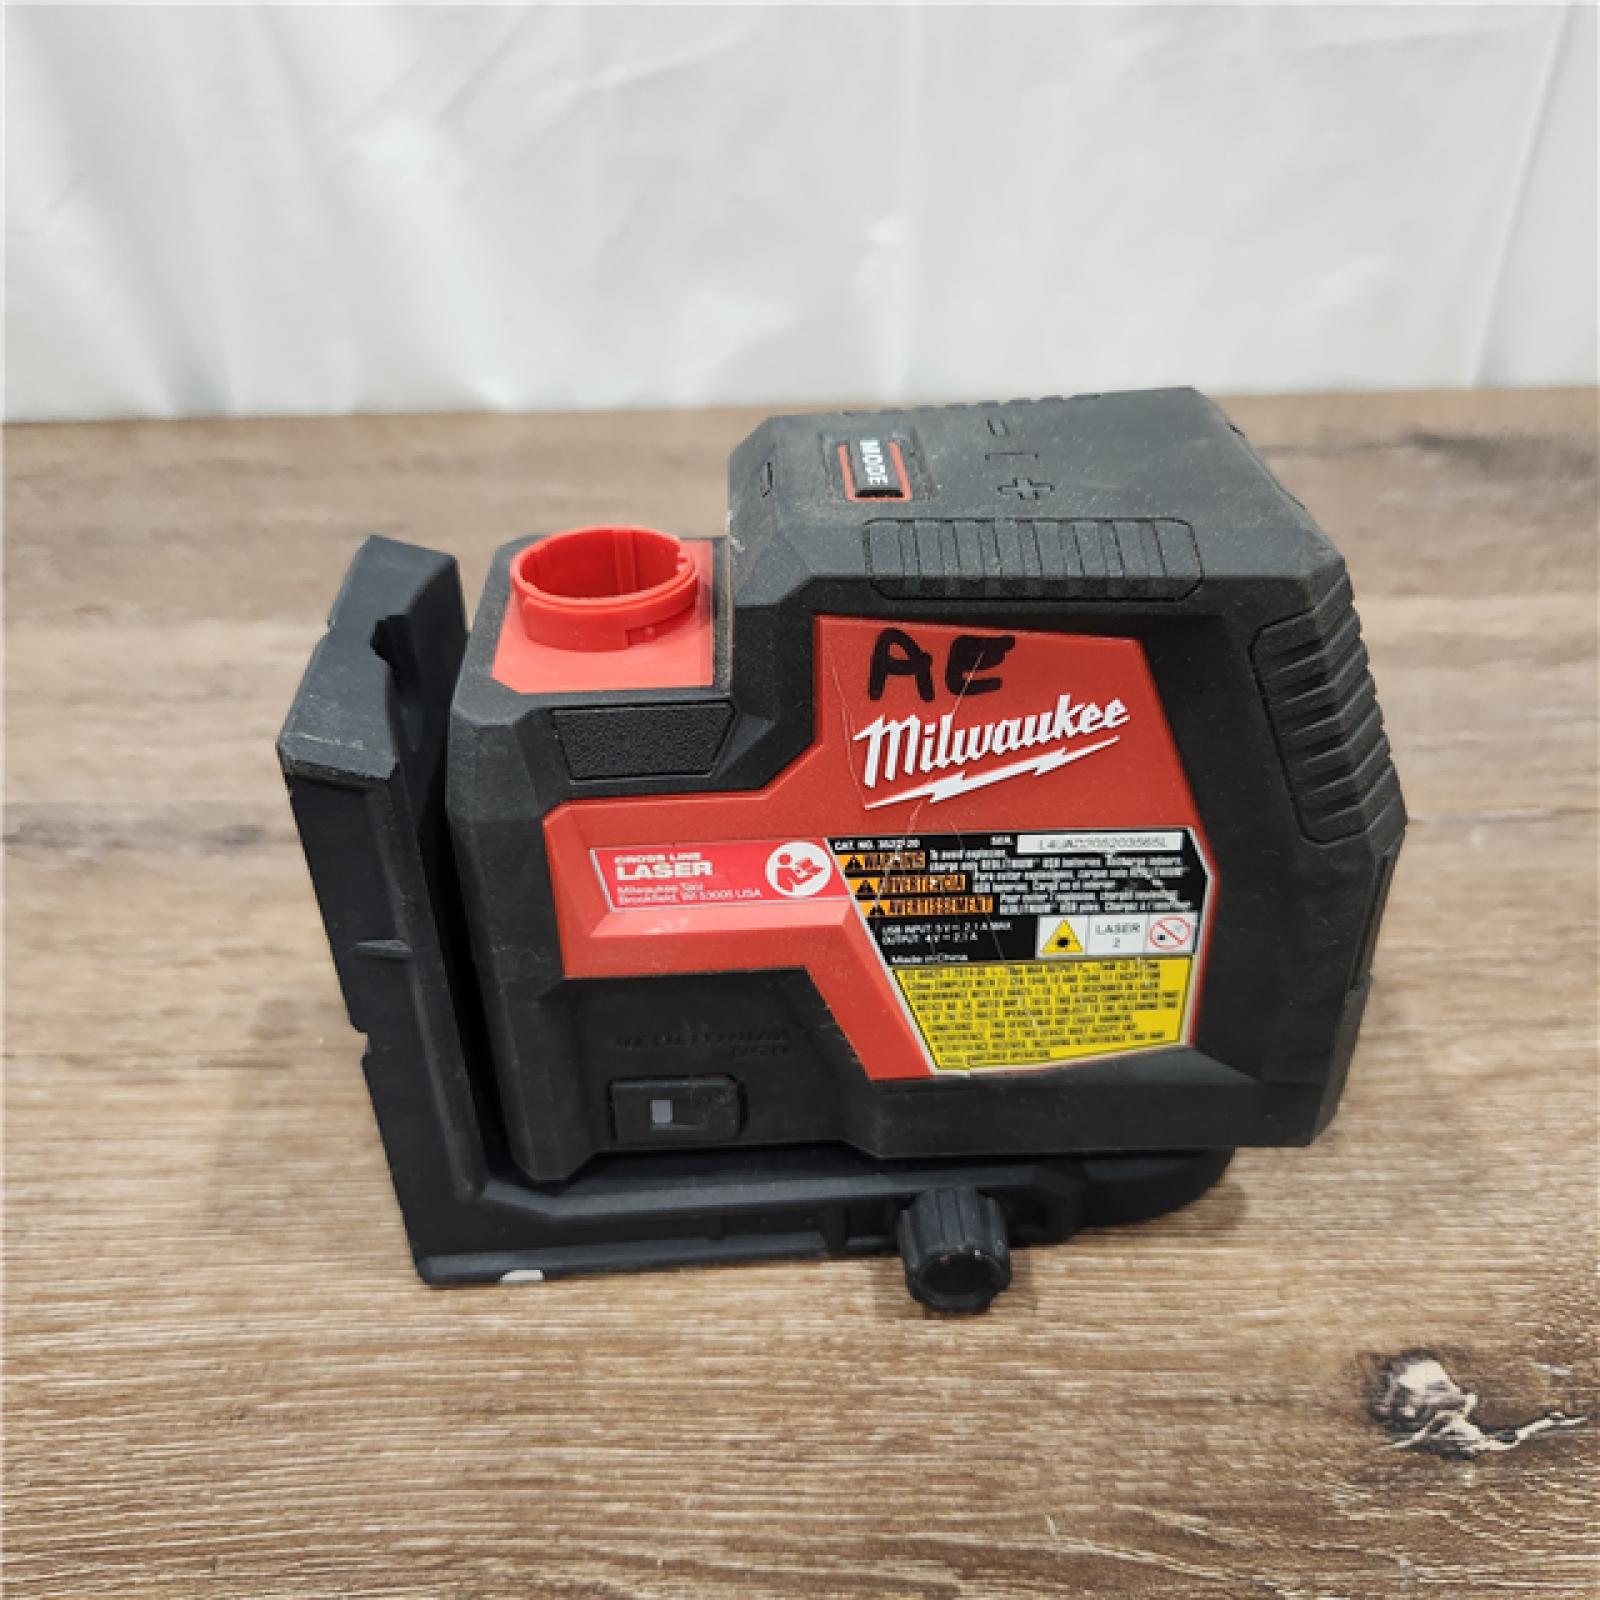 AS-IS MILWAUKEE 100 ft. REDLITHIUM Lithium-Ion USB Green Rechargeable Cross Line Laser Level